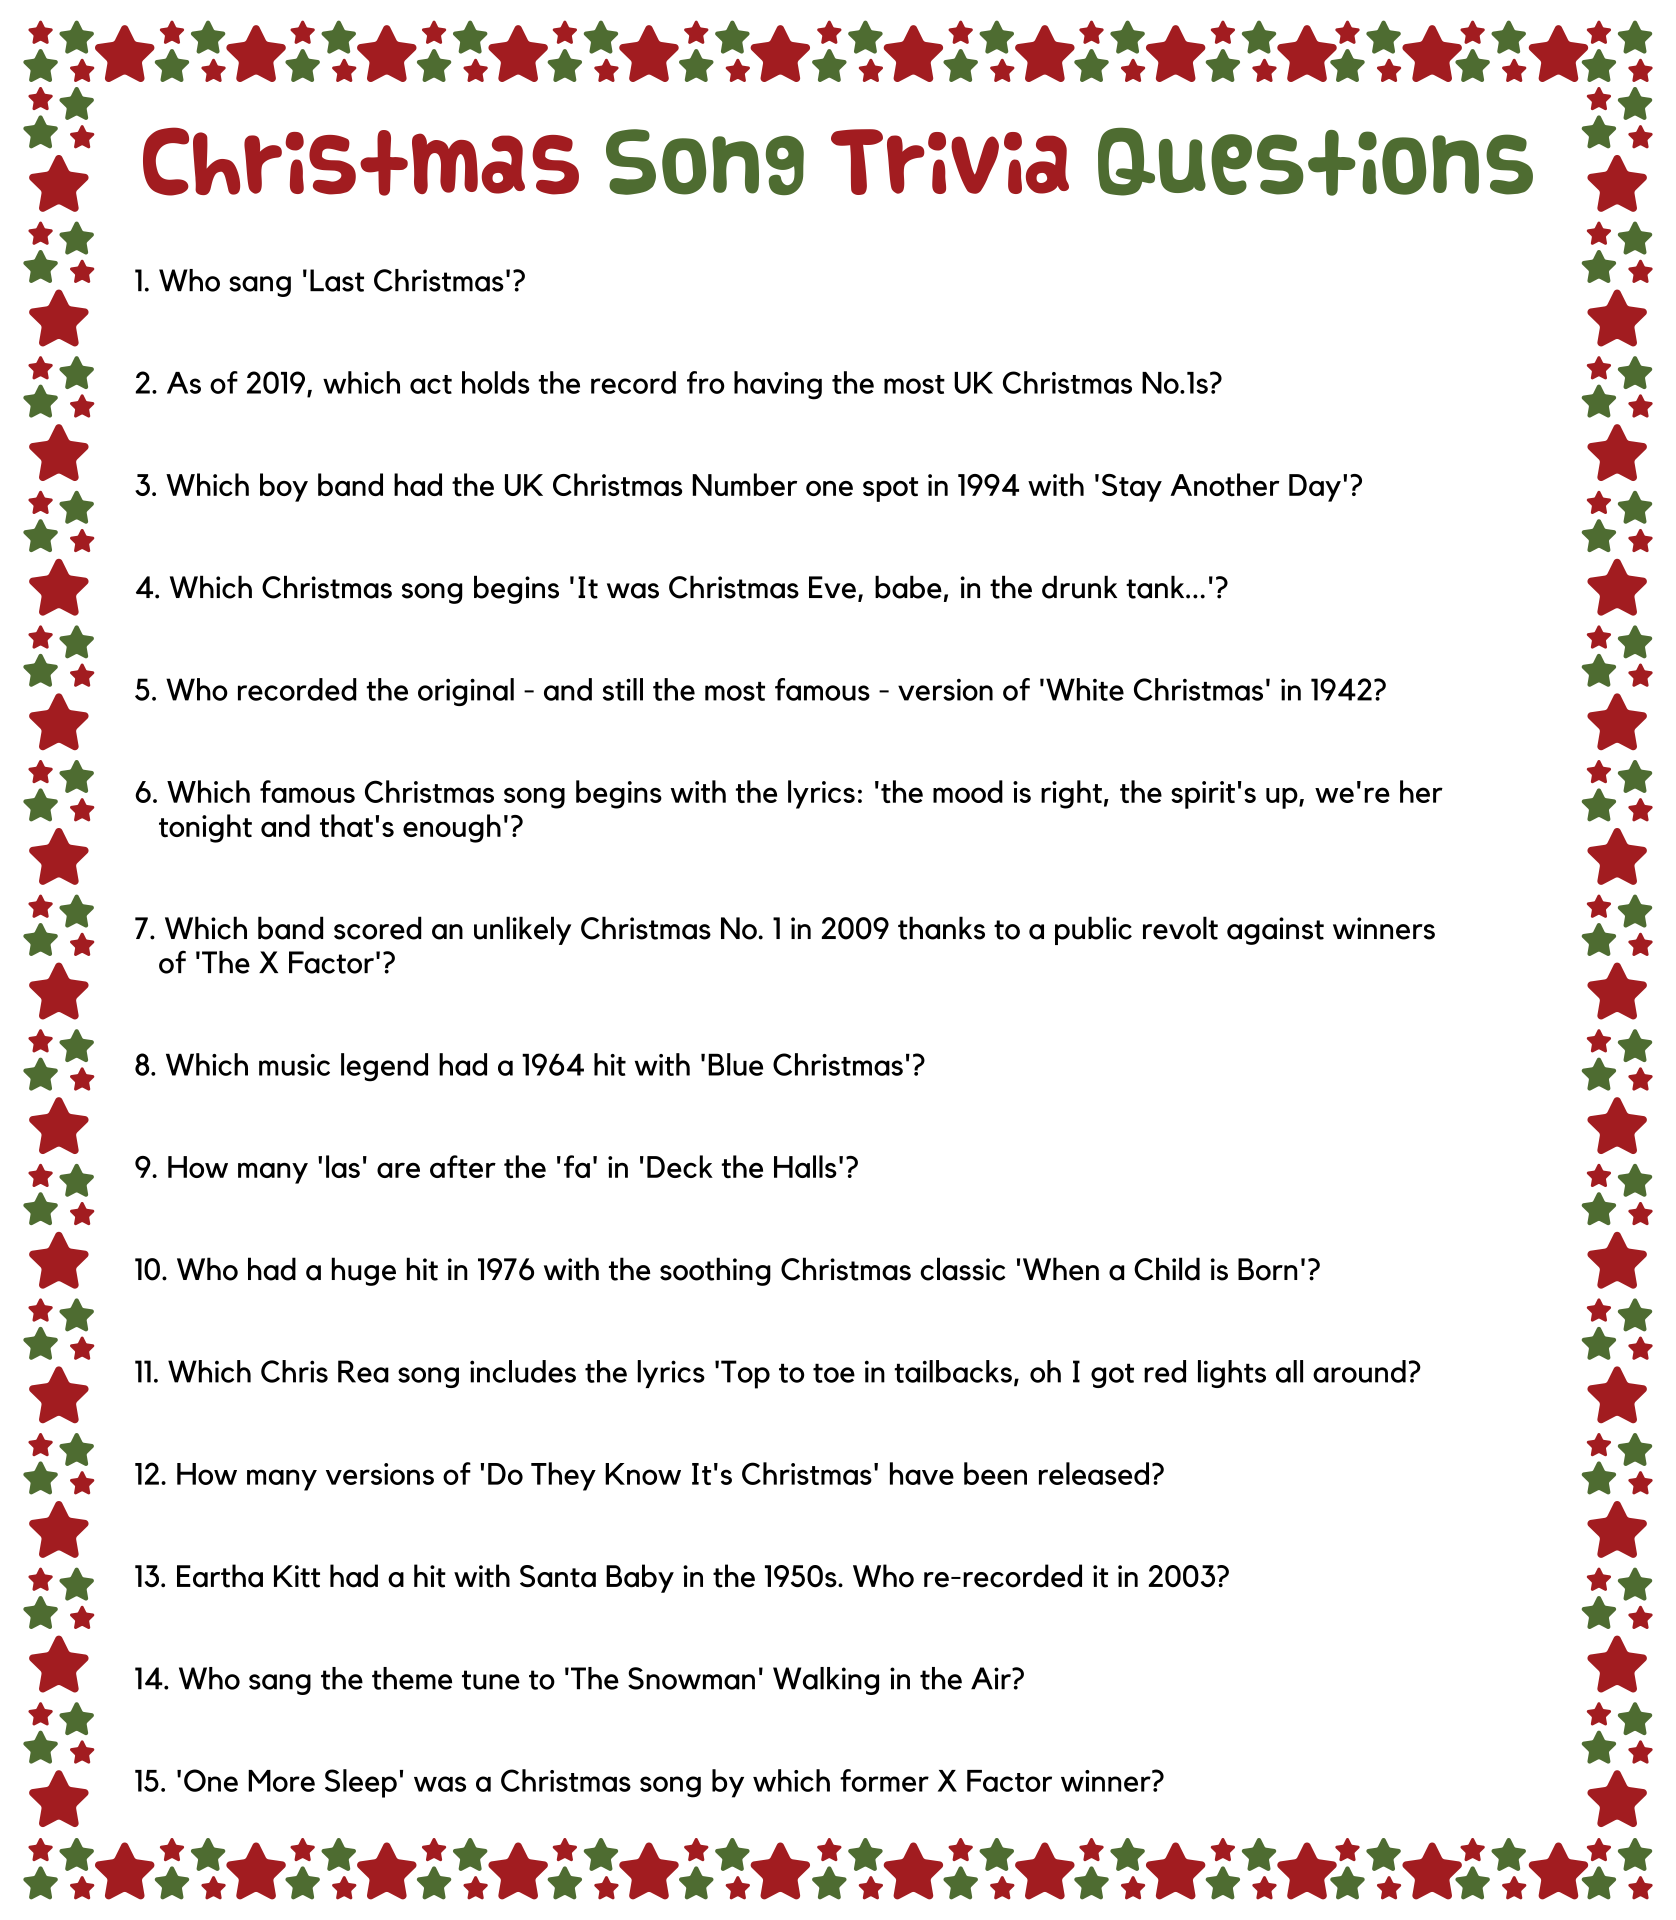 6-best-images-of-easy-christmas-trivia-printable-free-printable-christmas-games-trivia-and